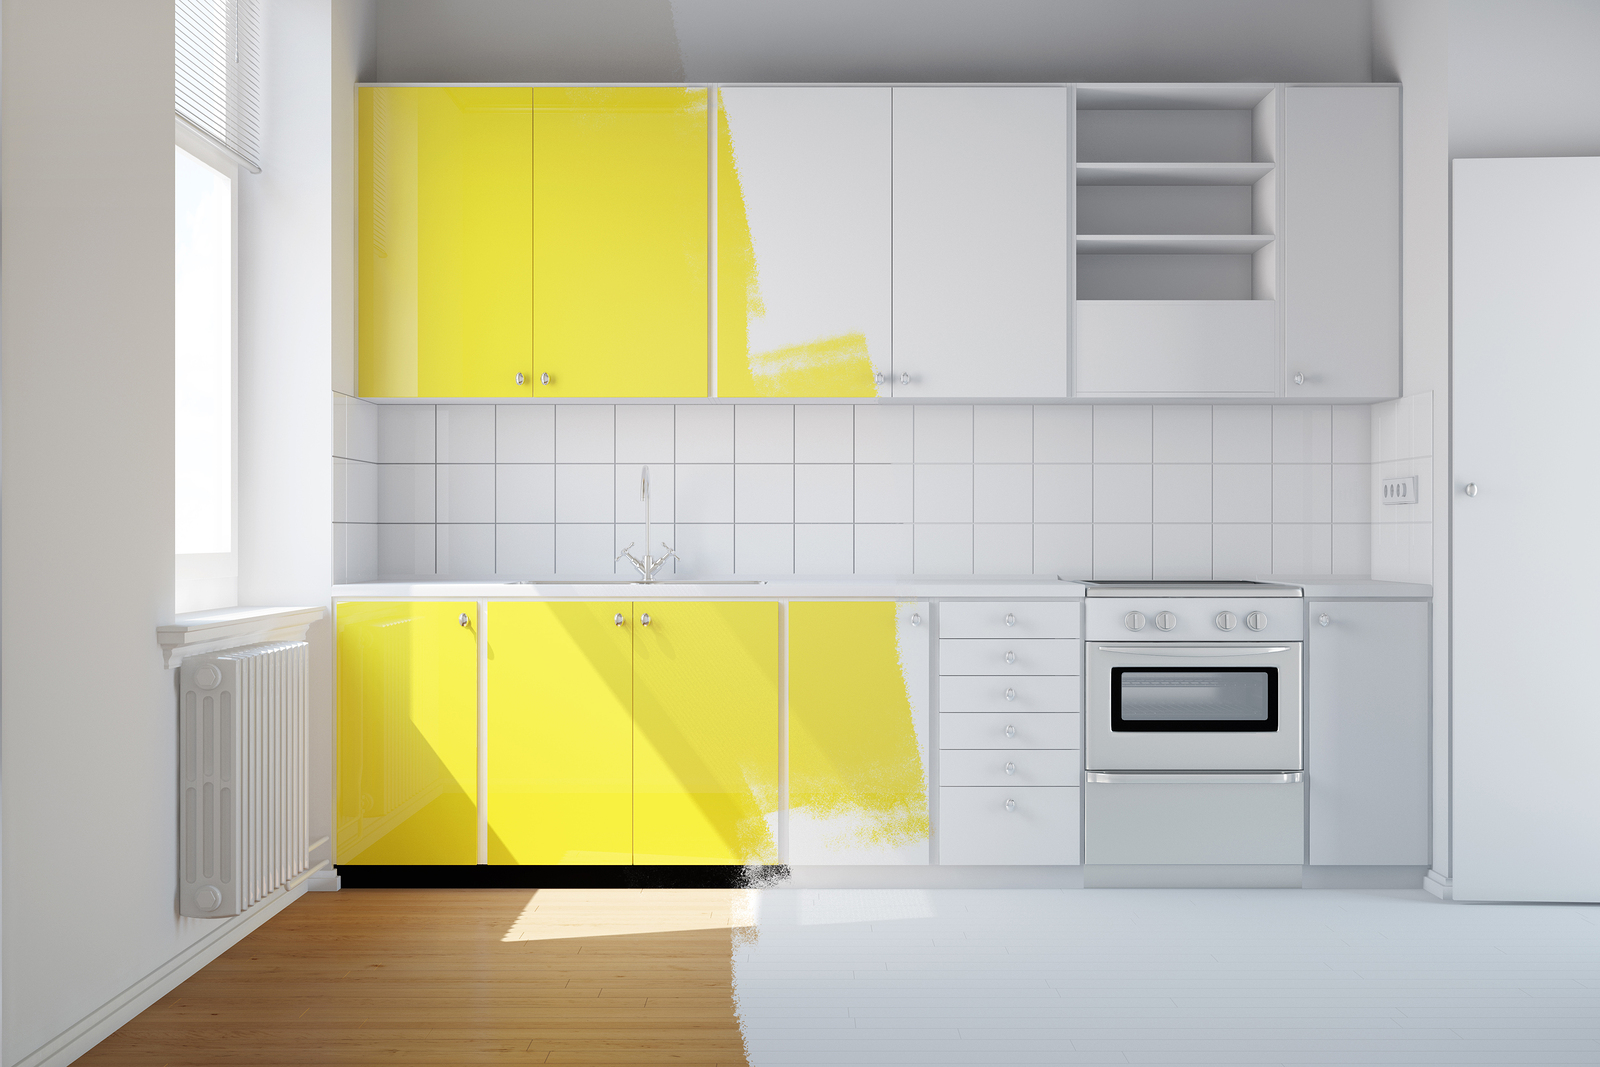 Renovation of a small kitchen from white to yellow